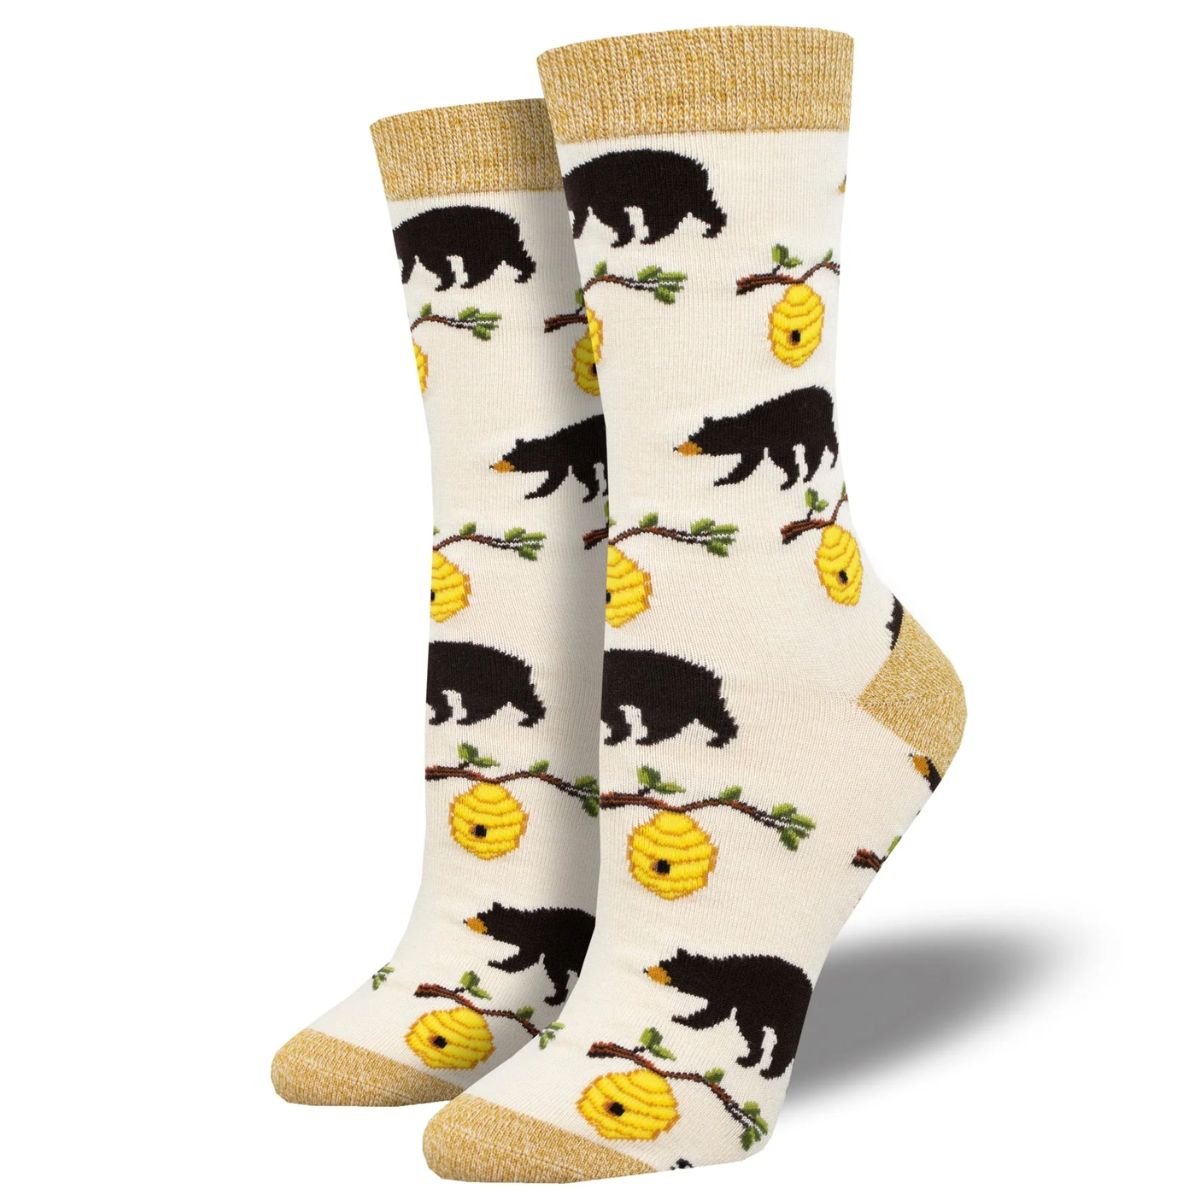 Bears and Bees Socks a pair of ivory white socks with bears and beehives print